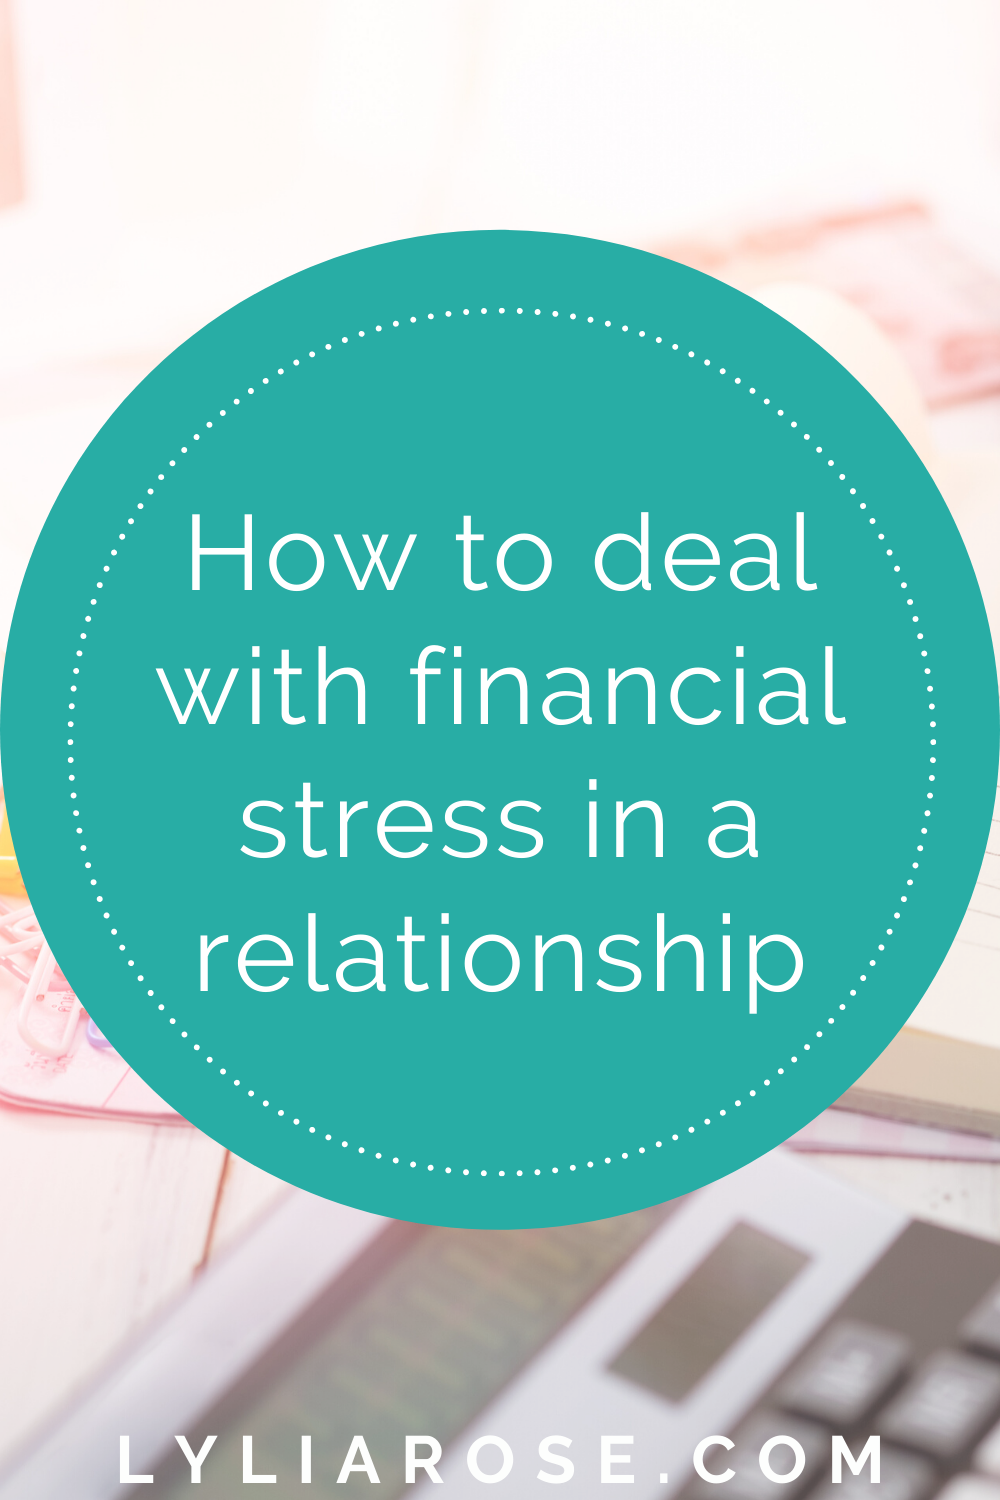 How to deal with financial stress in a relationship (1)